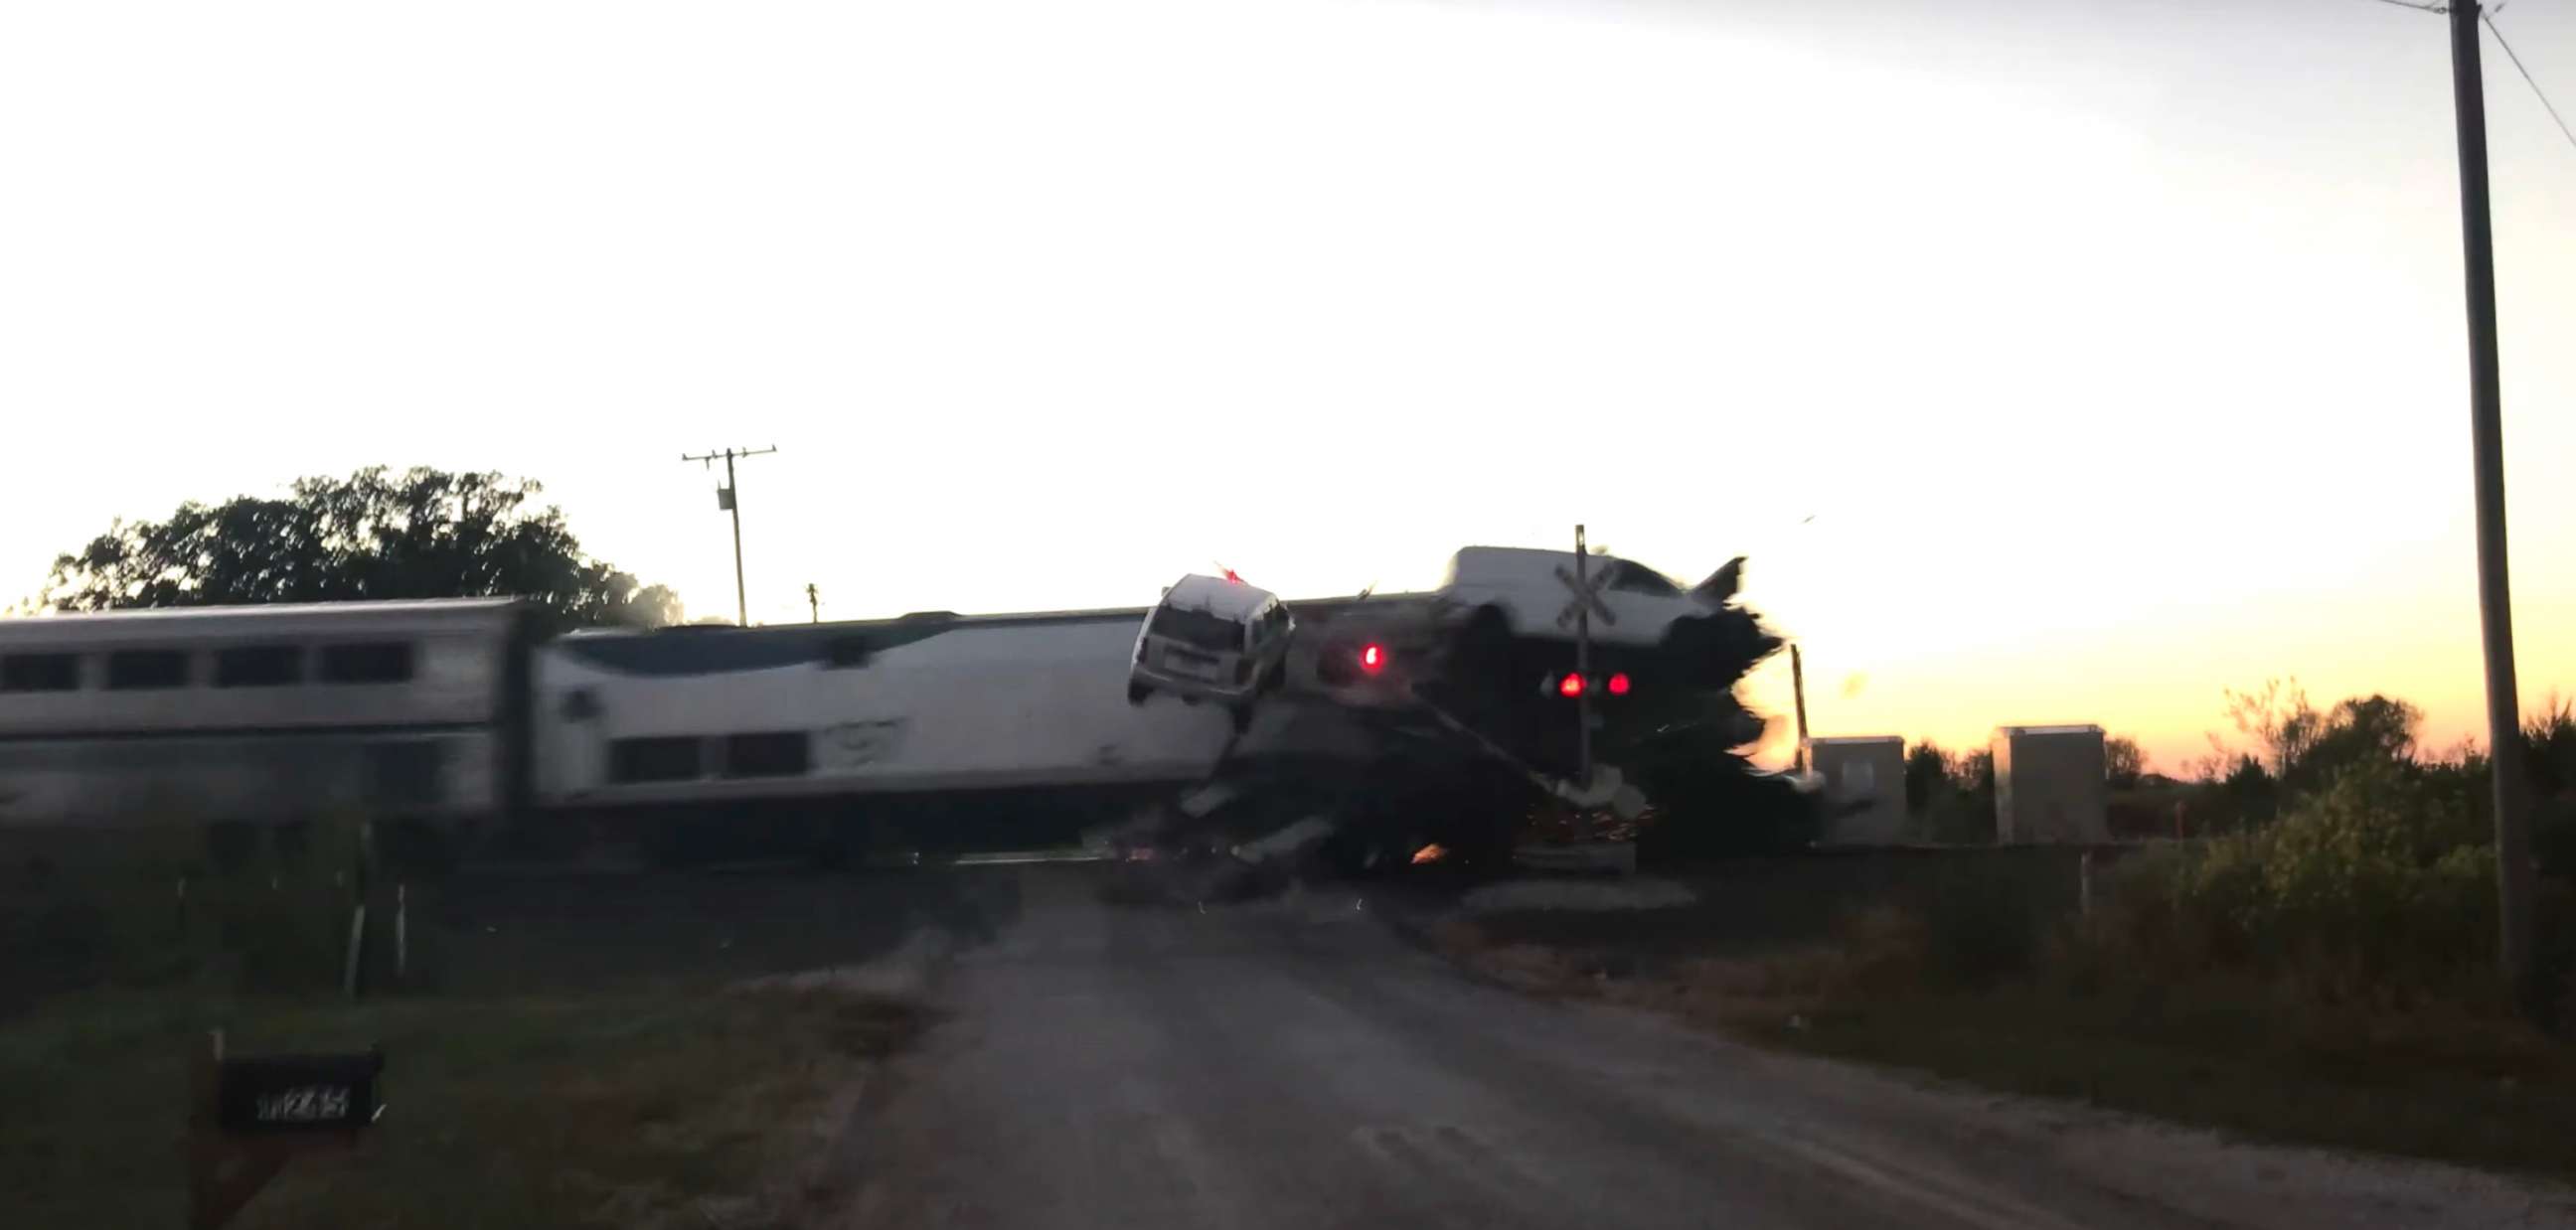 PHOTO: A still from a bystander's video capturing an Amtrak train colliding with a car hauler semi-truck in Thackerville, Oklahoma, on Oct. 15, 2021.